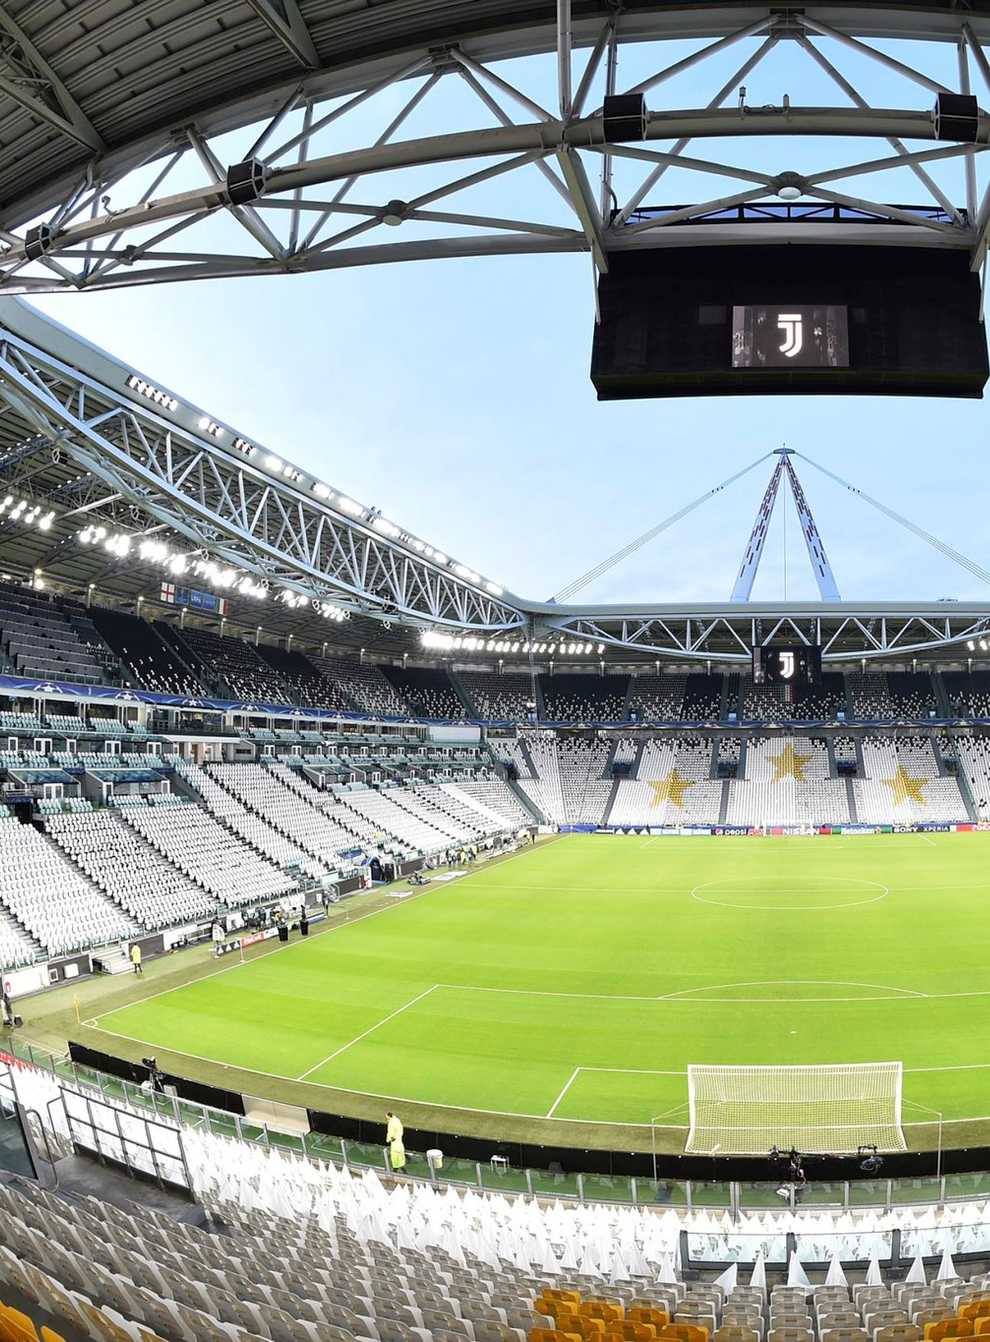 The Juventus Stadium has a capacity of 41,507 (PA Images)